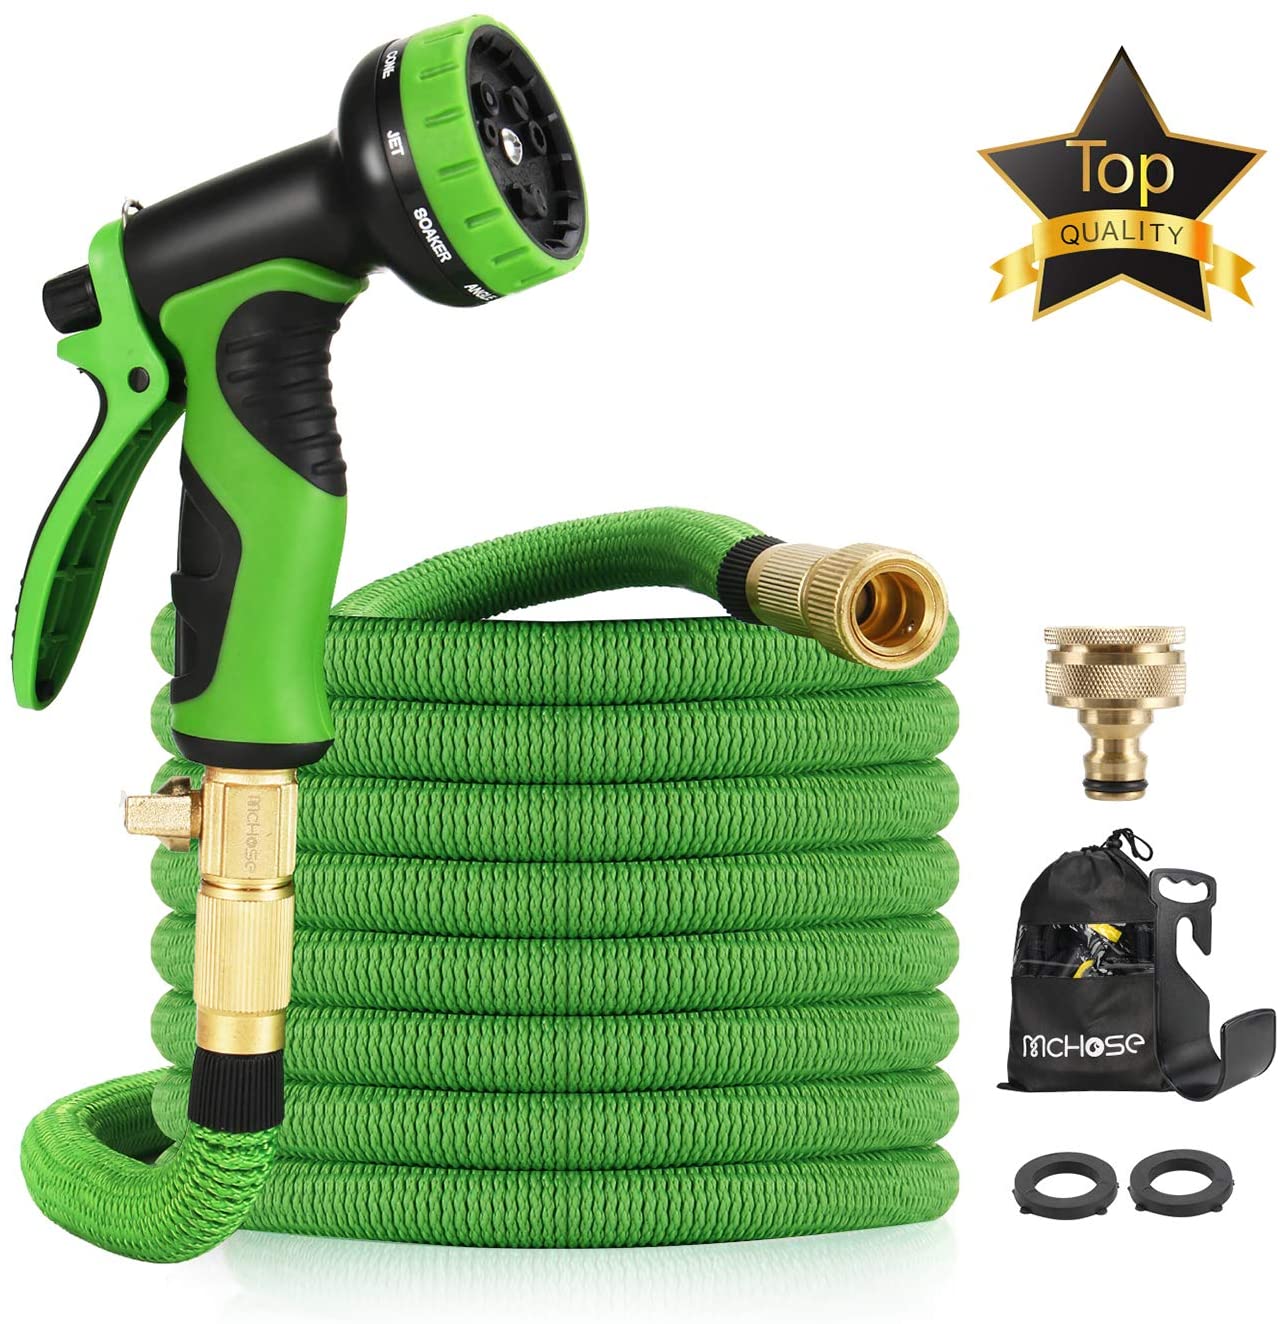 15M Garden Hose - ALL NEW Expandable Garden Hose with Double Latex Core, 3/4" Solid Brass Fittings, Australian Standard Universal Tap Adaptor, Expandable Water Hose Set  (Green)